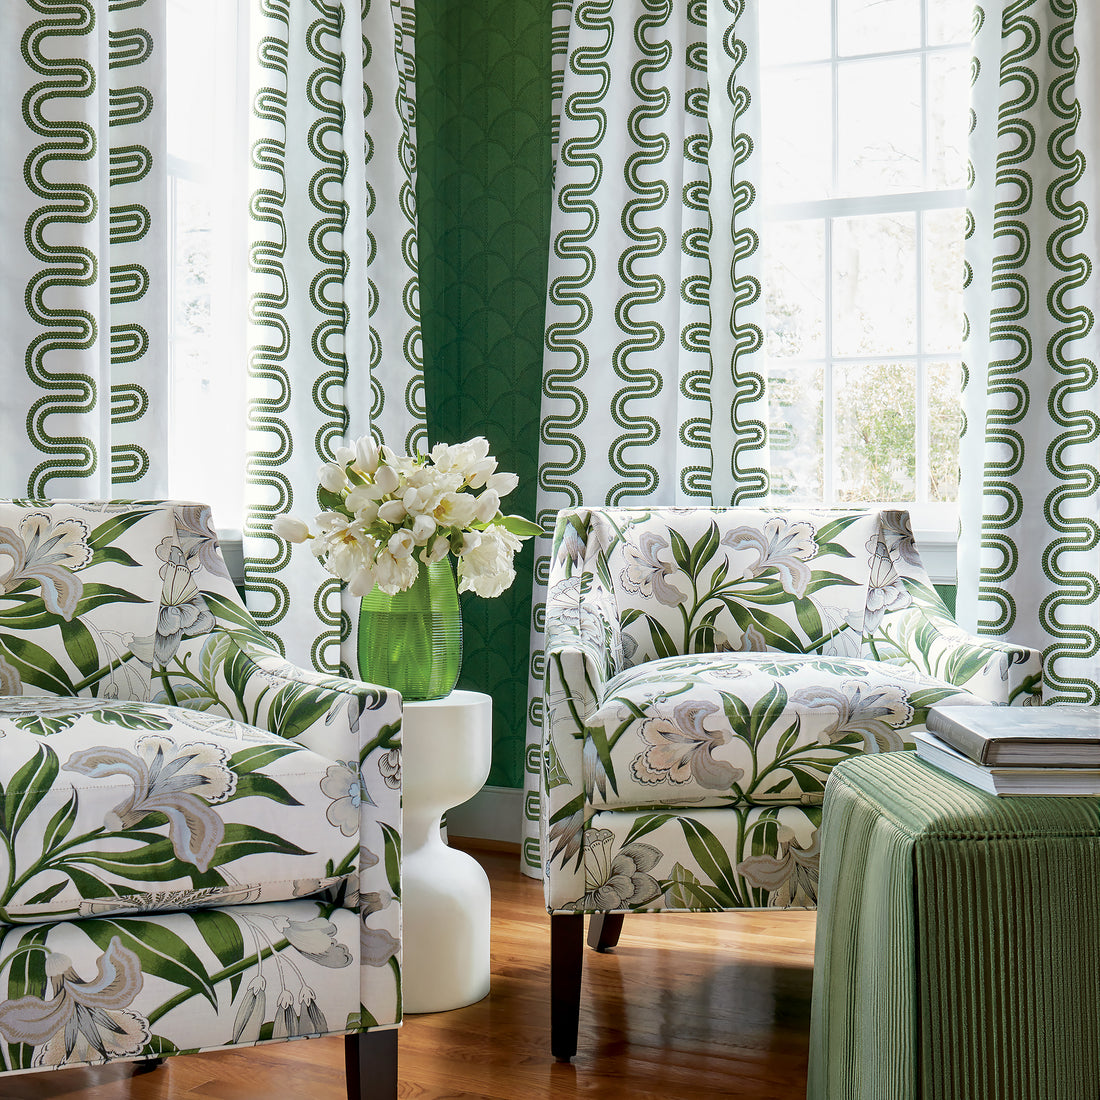 Room with Drapery in Herriot Way Embroidery in Green and White - pattern number AF9635 - by Anna French